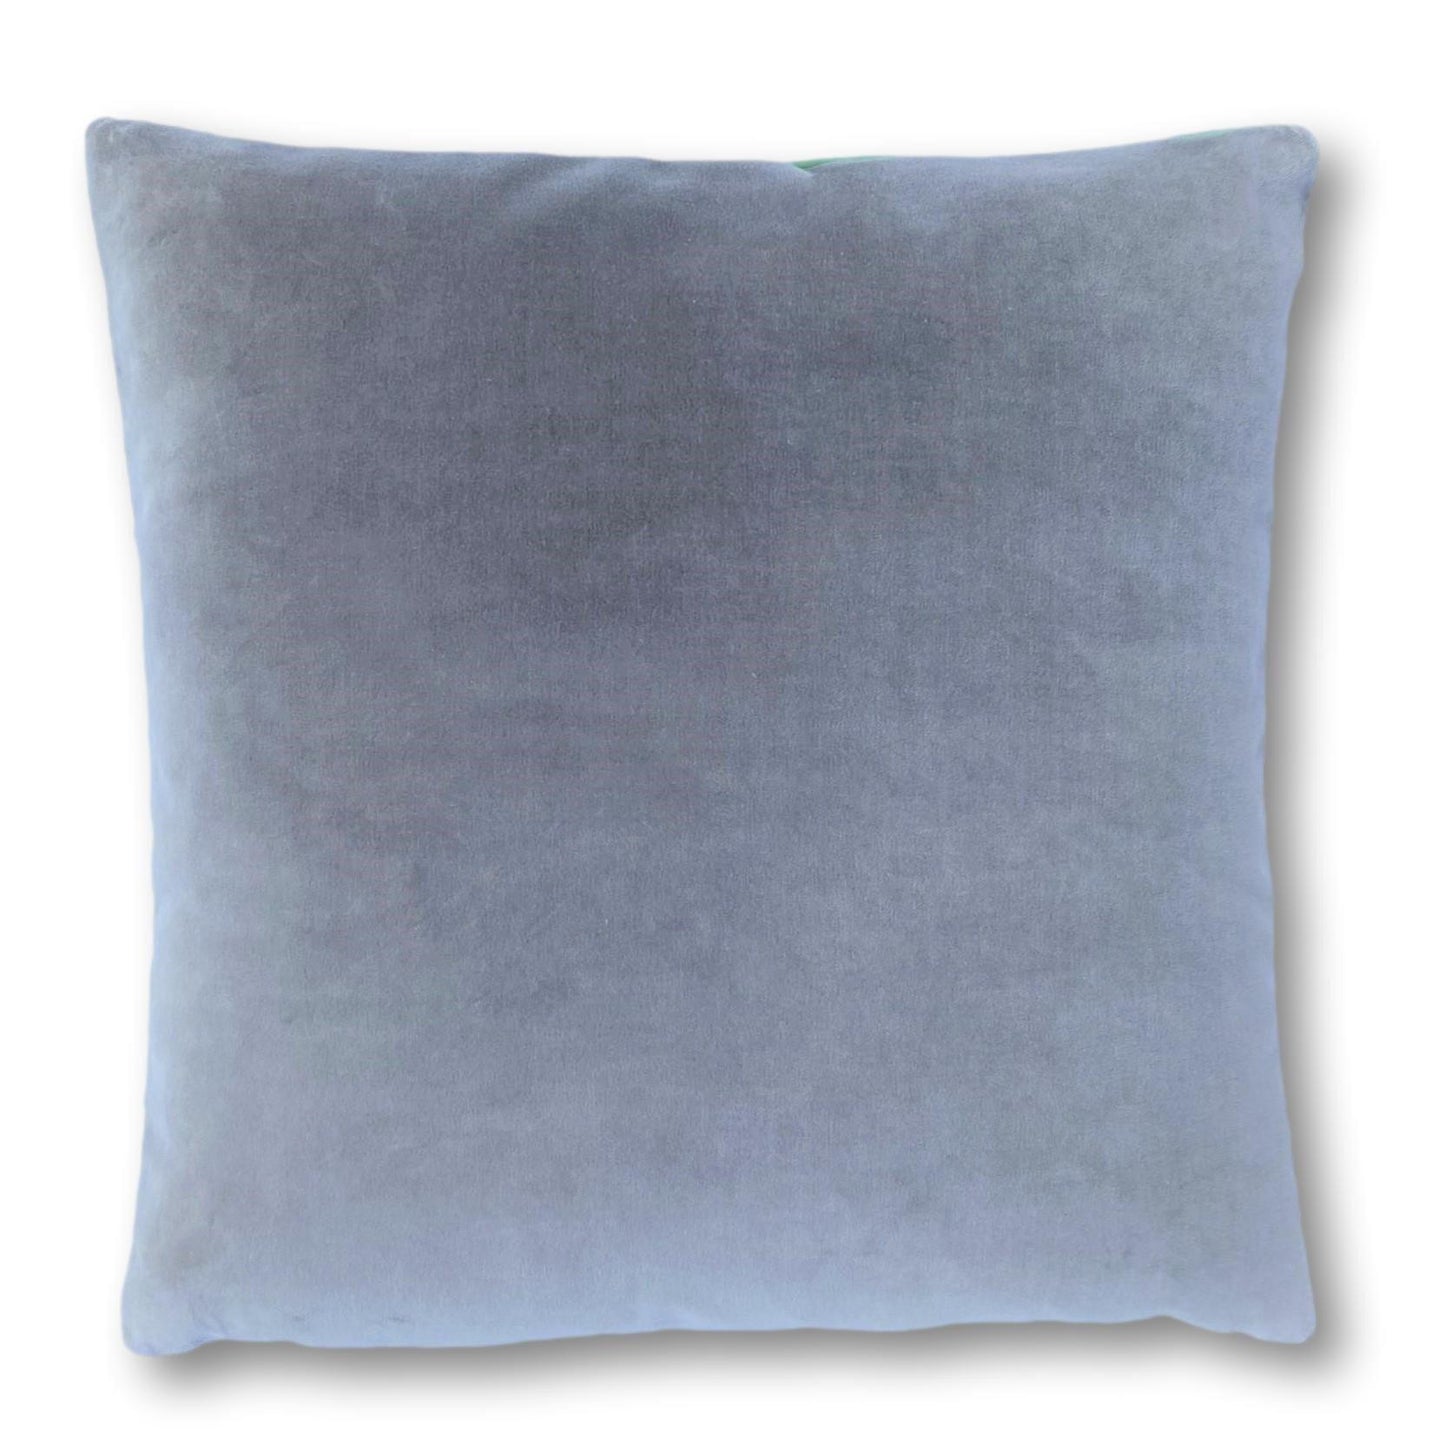 teal and grey cushions